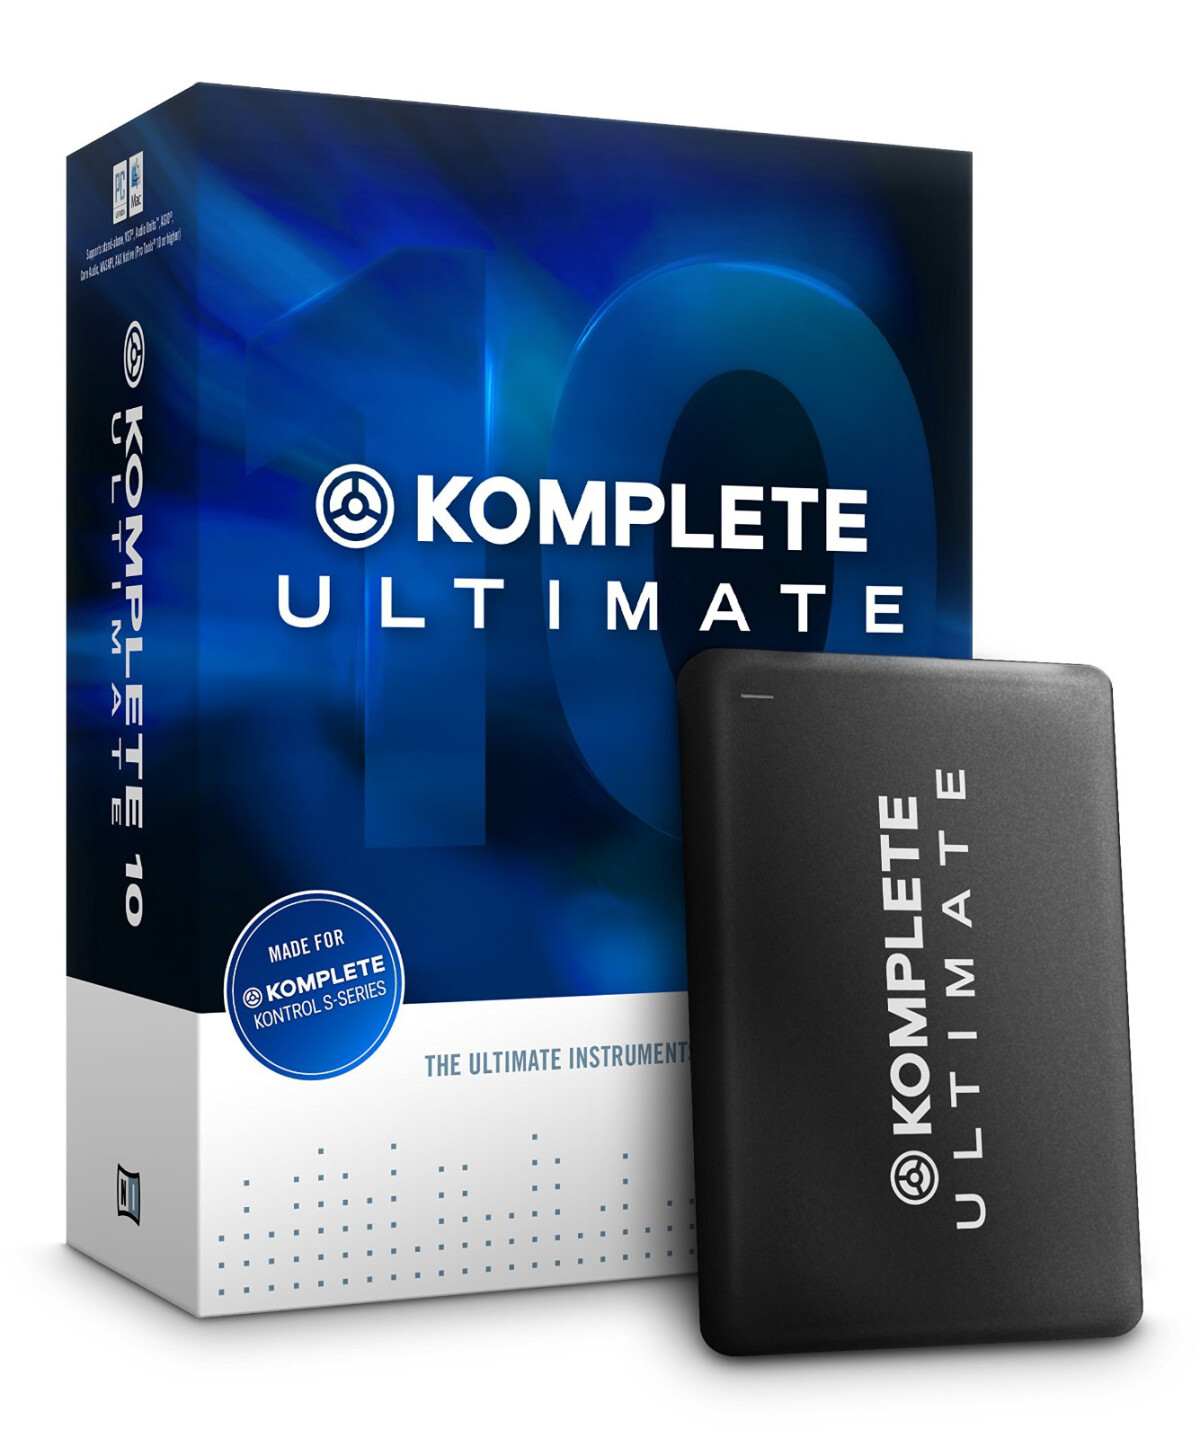 NI launches Komplete 10 discount offer